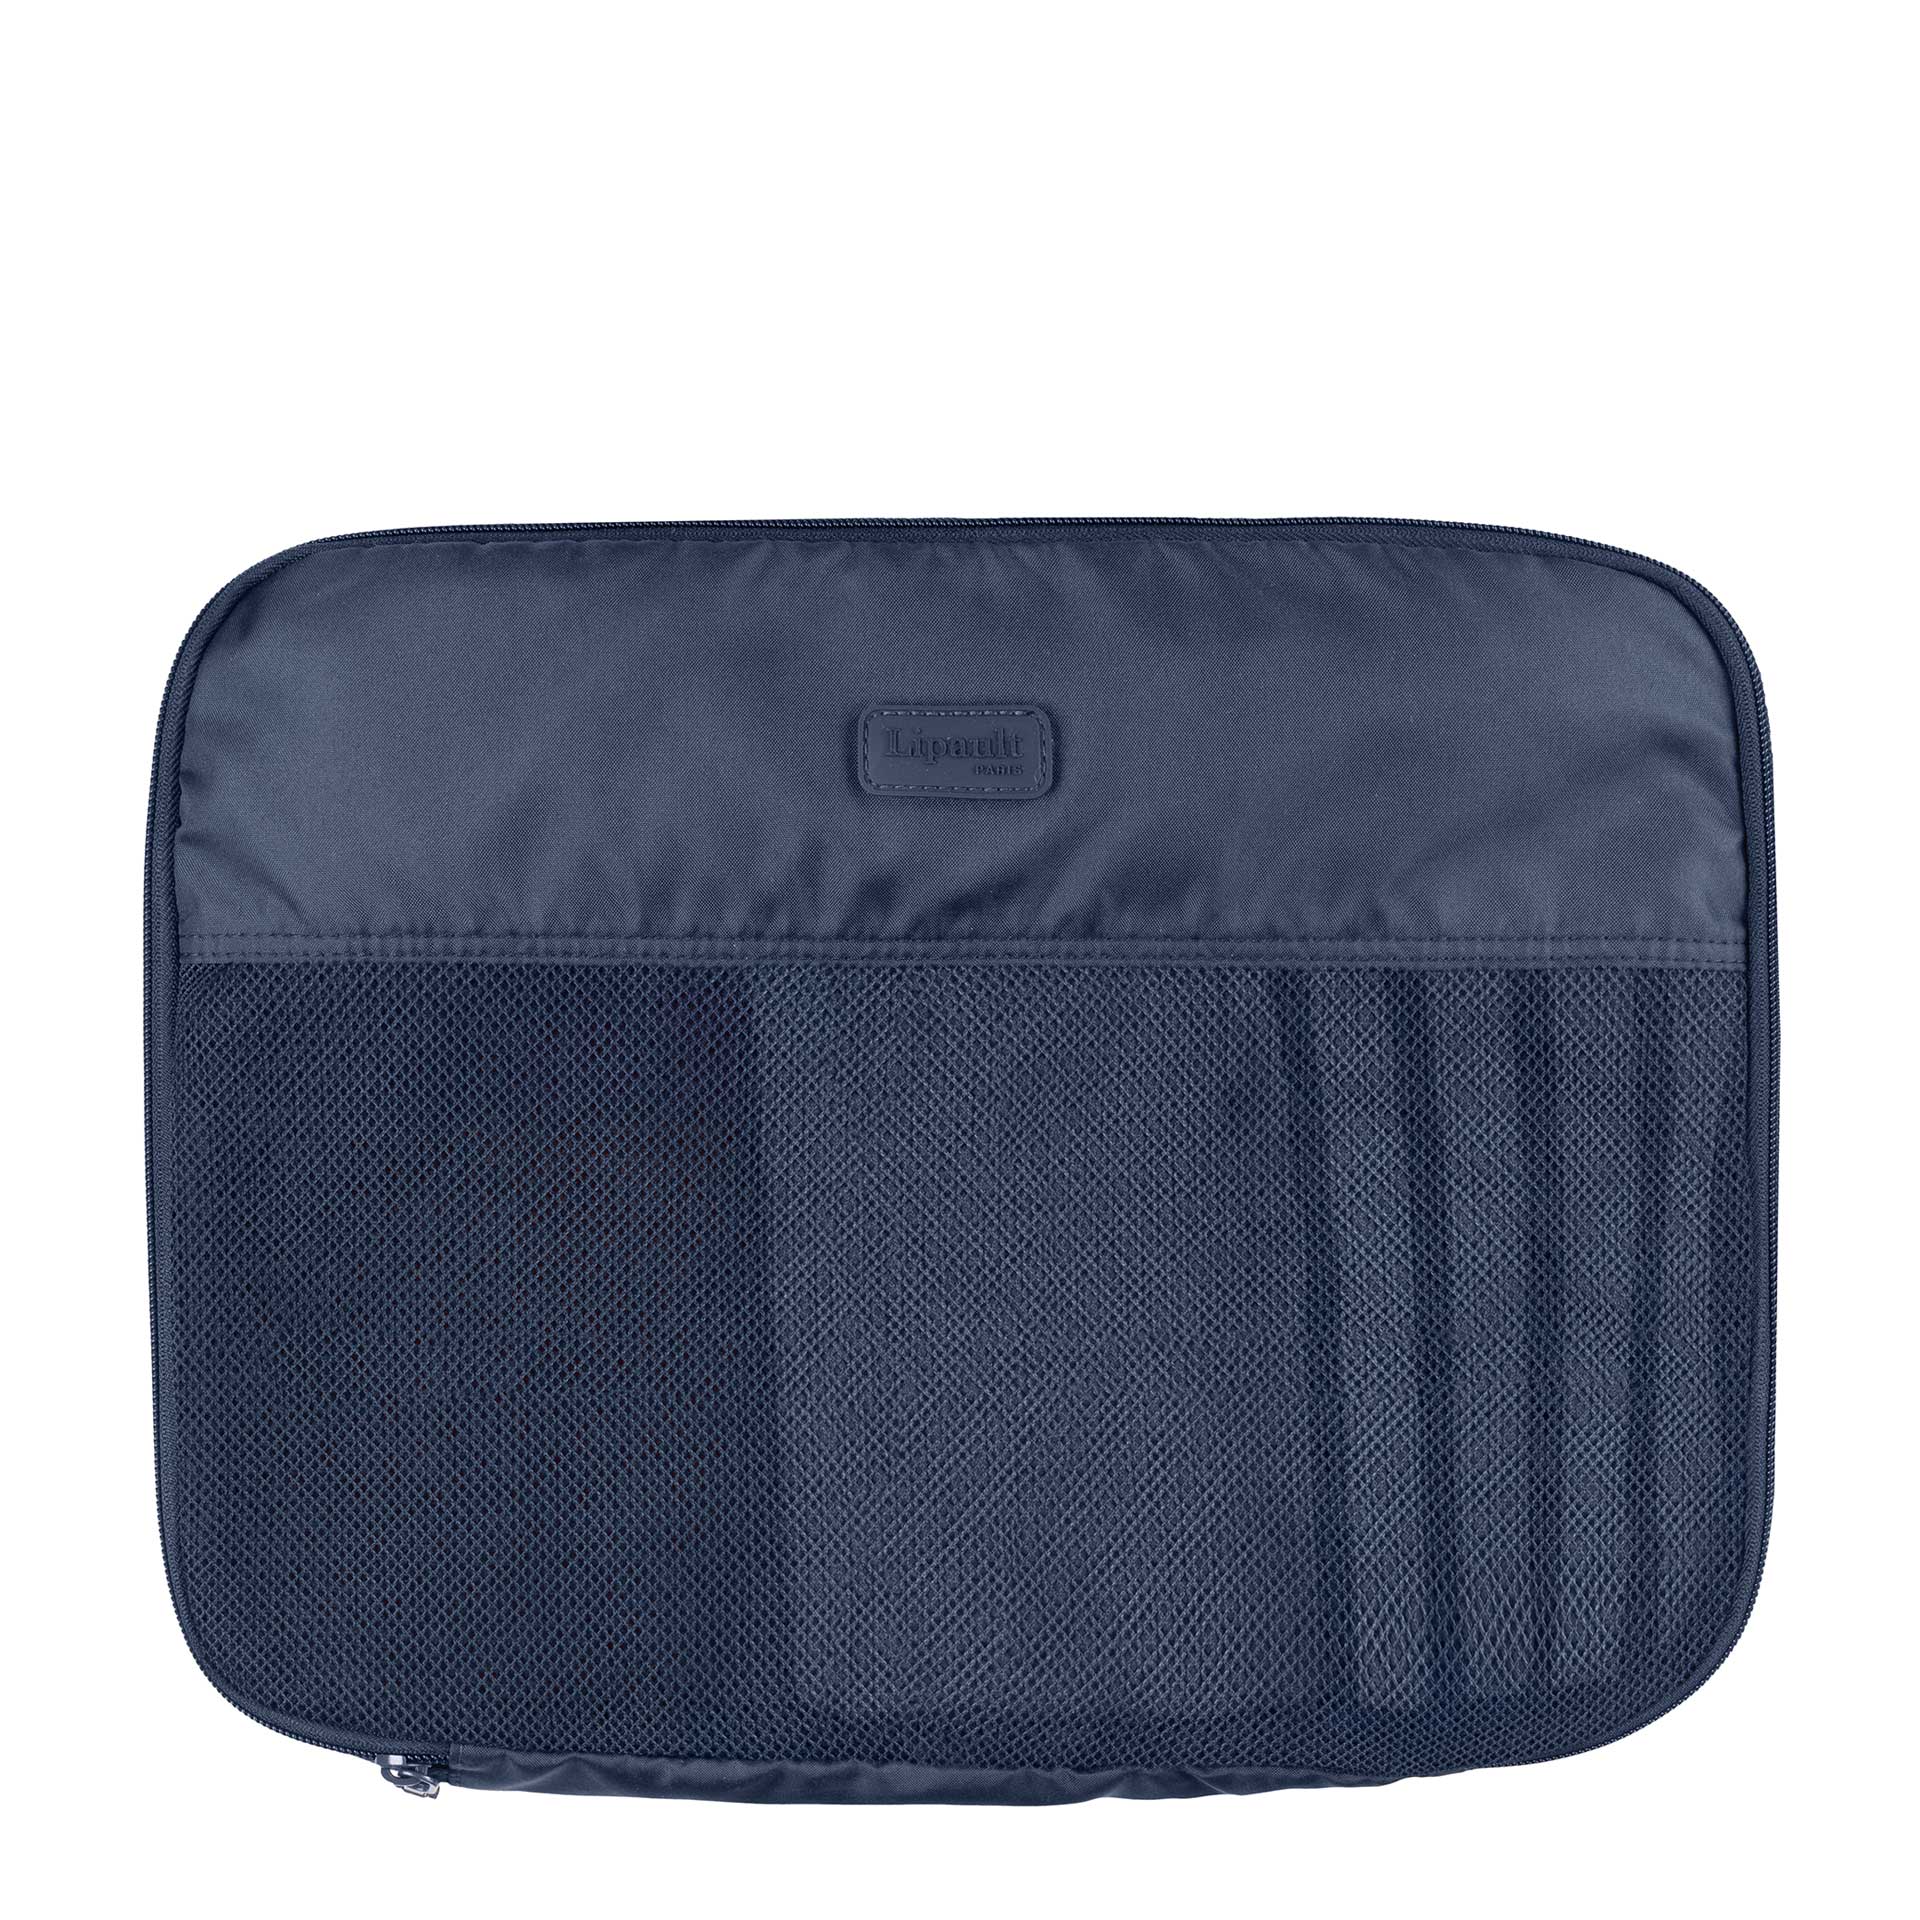 Lipault Packing Cube L navy